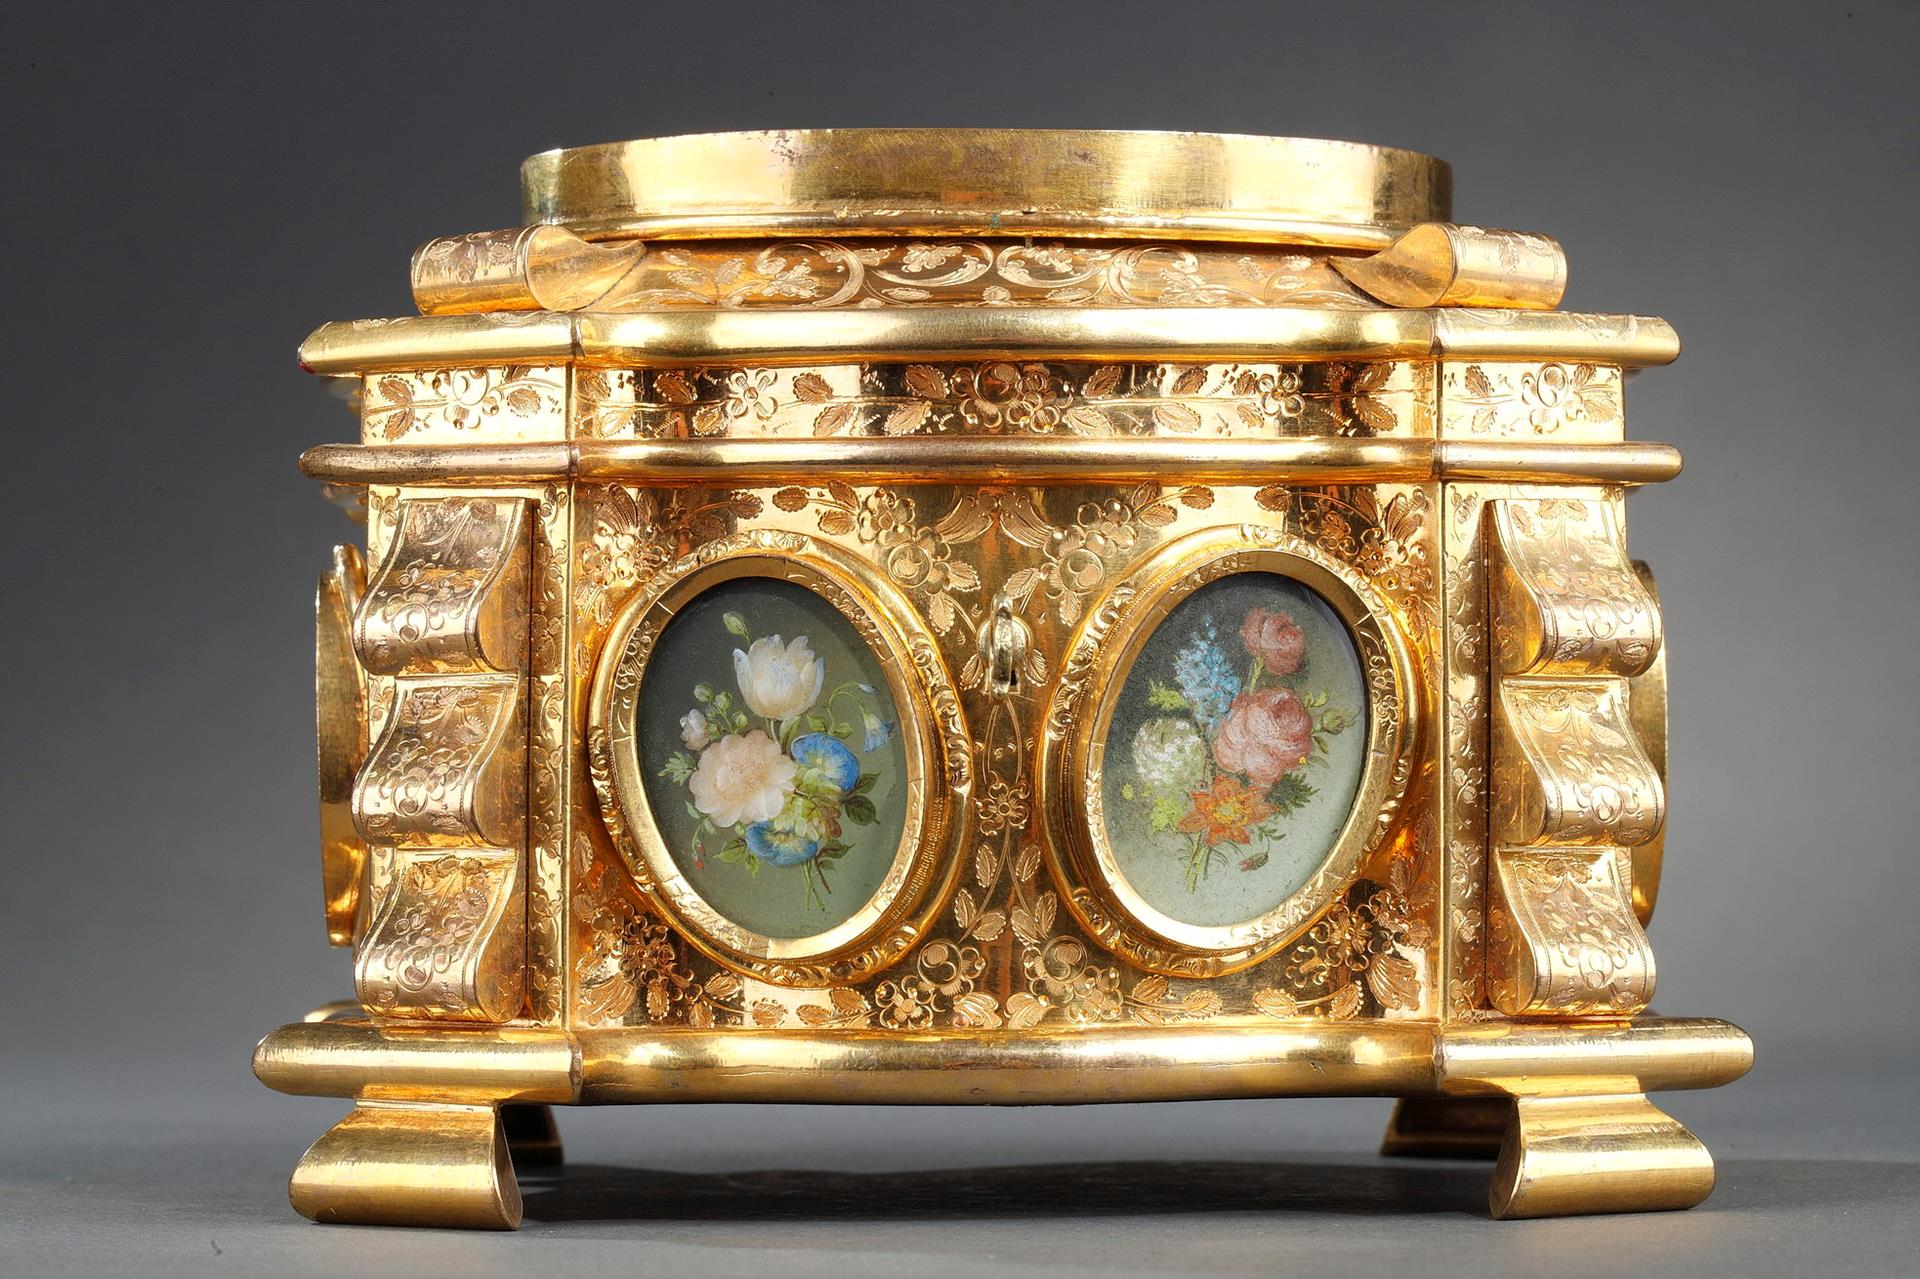 Mid-19th century engraved gilted bronze mounted casket with miniatures.